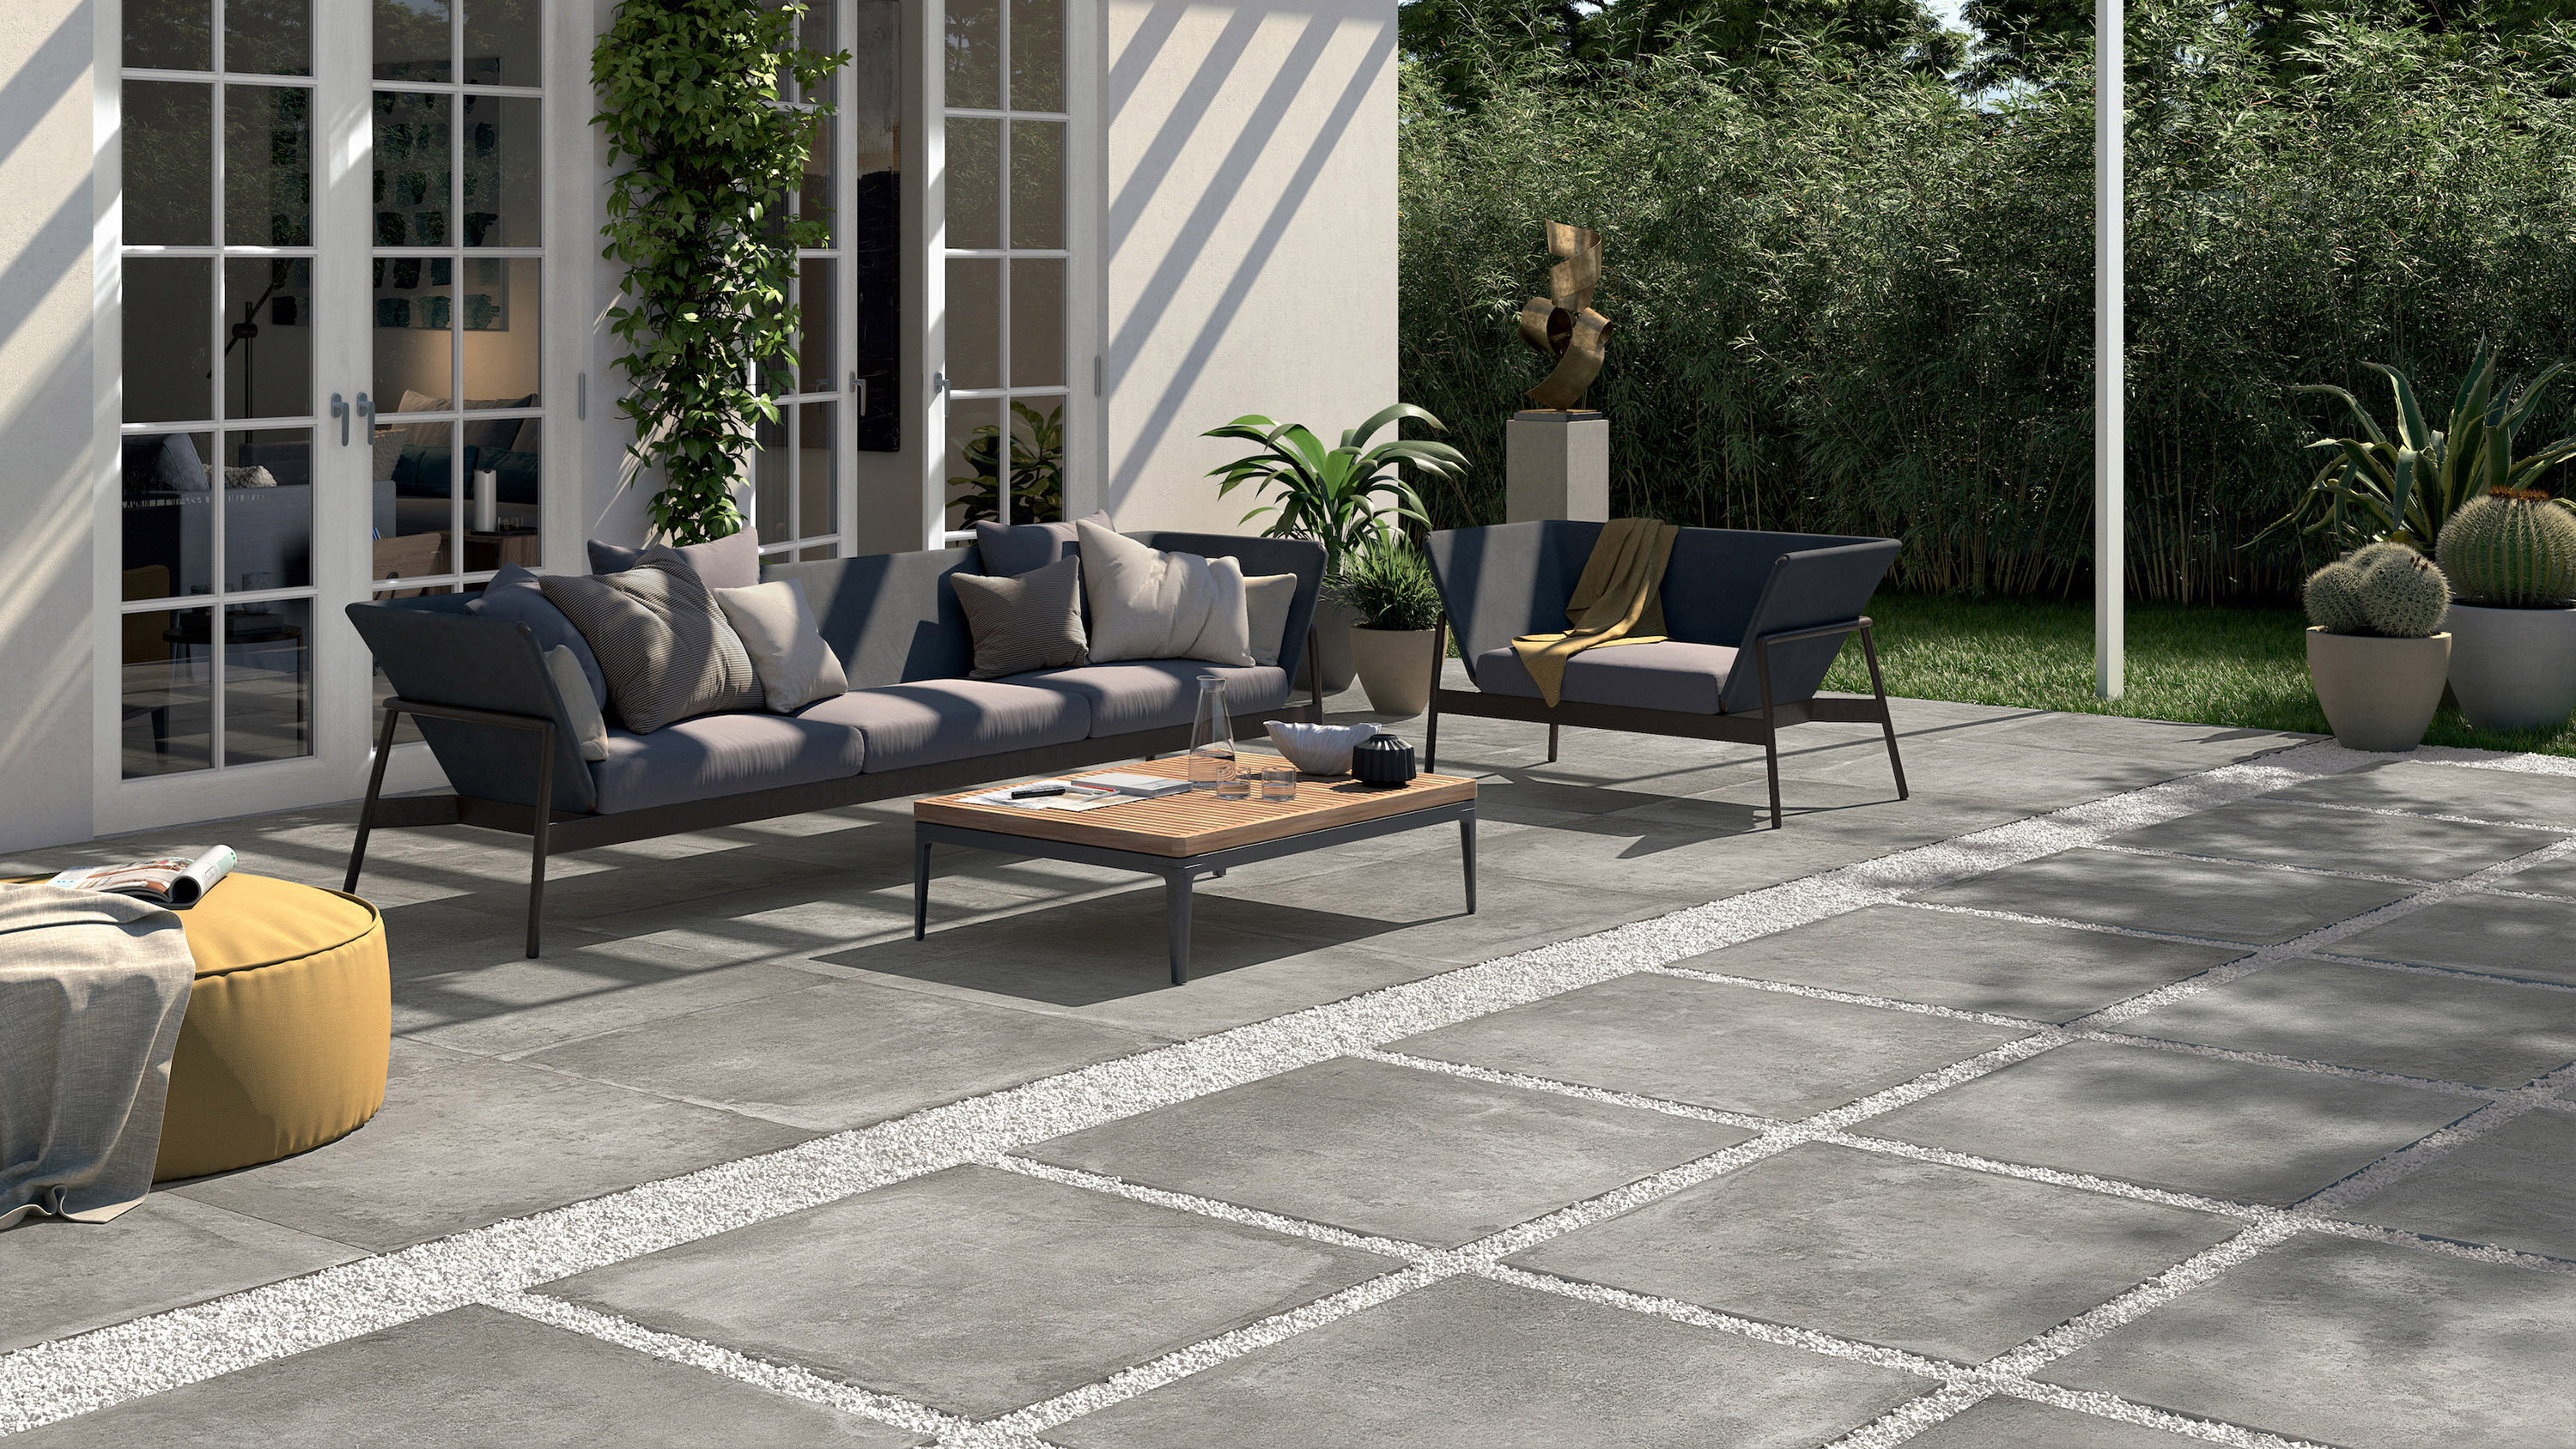 Modern Paving Ideas: 13 Ways With Tiles, Slabs And Stone For A Contemporary  Look | Gardeningetc